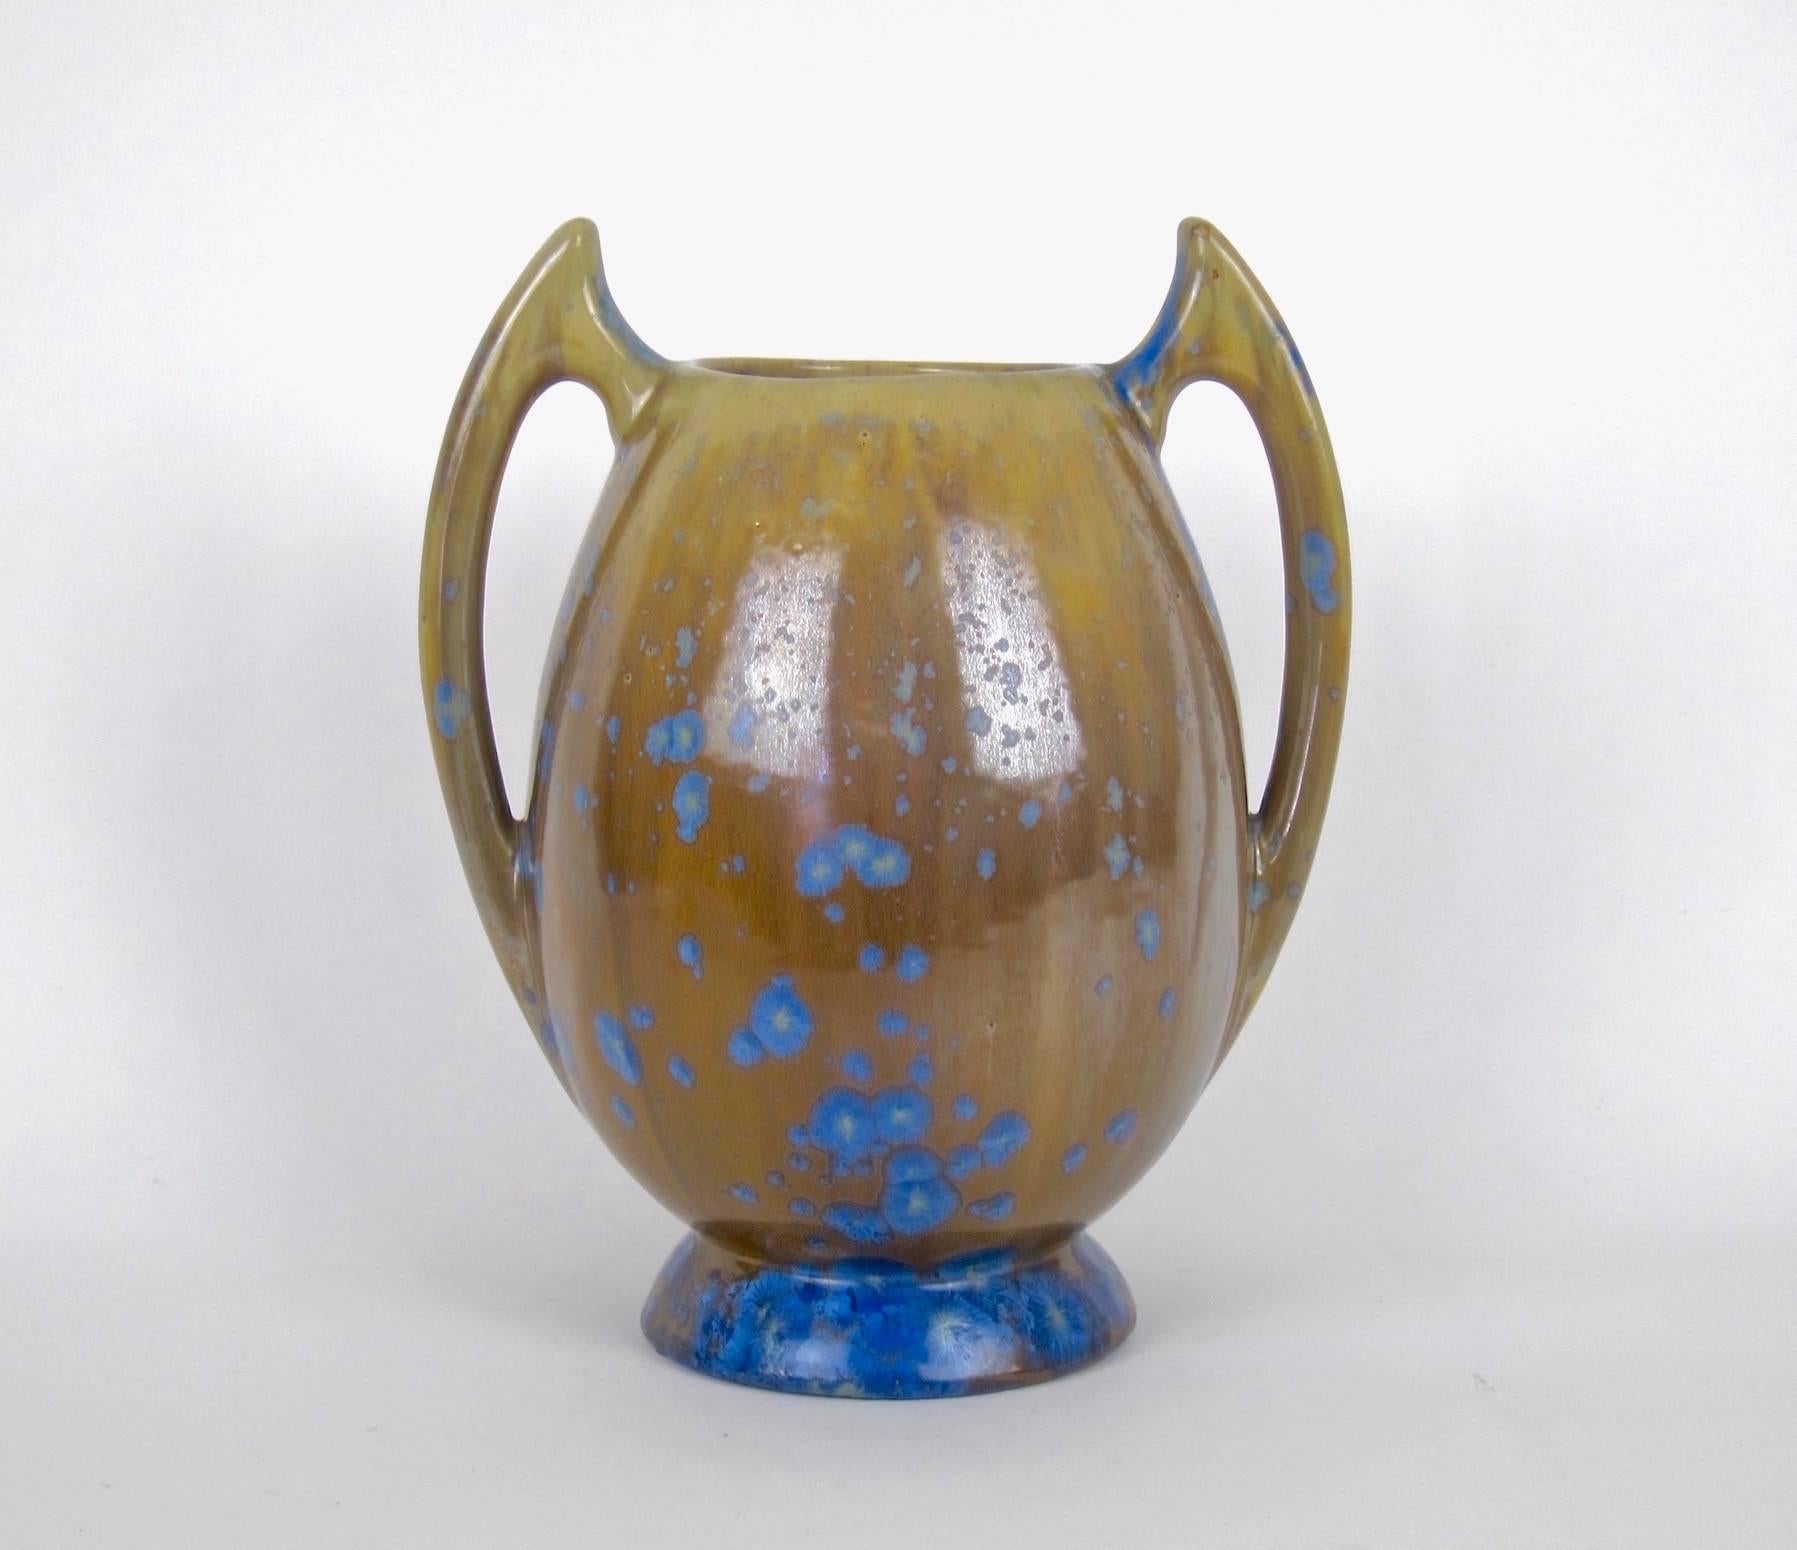 A handsome Art Nouveau stoneware vase from Pierrefonds Pottery of France. This sculptural and heavy antique vessel was crafted by hand at the turn of the 20th century, circa 1905. The vessel has two "batwing" handles and an attractive